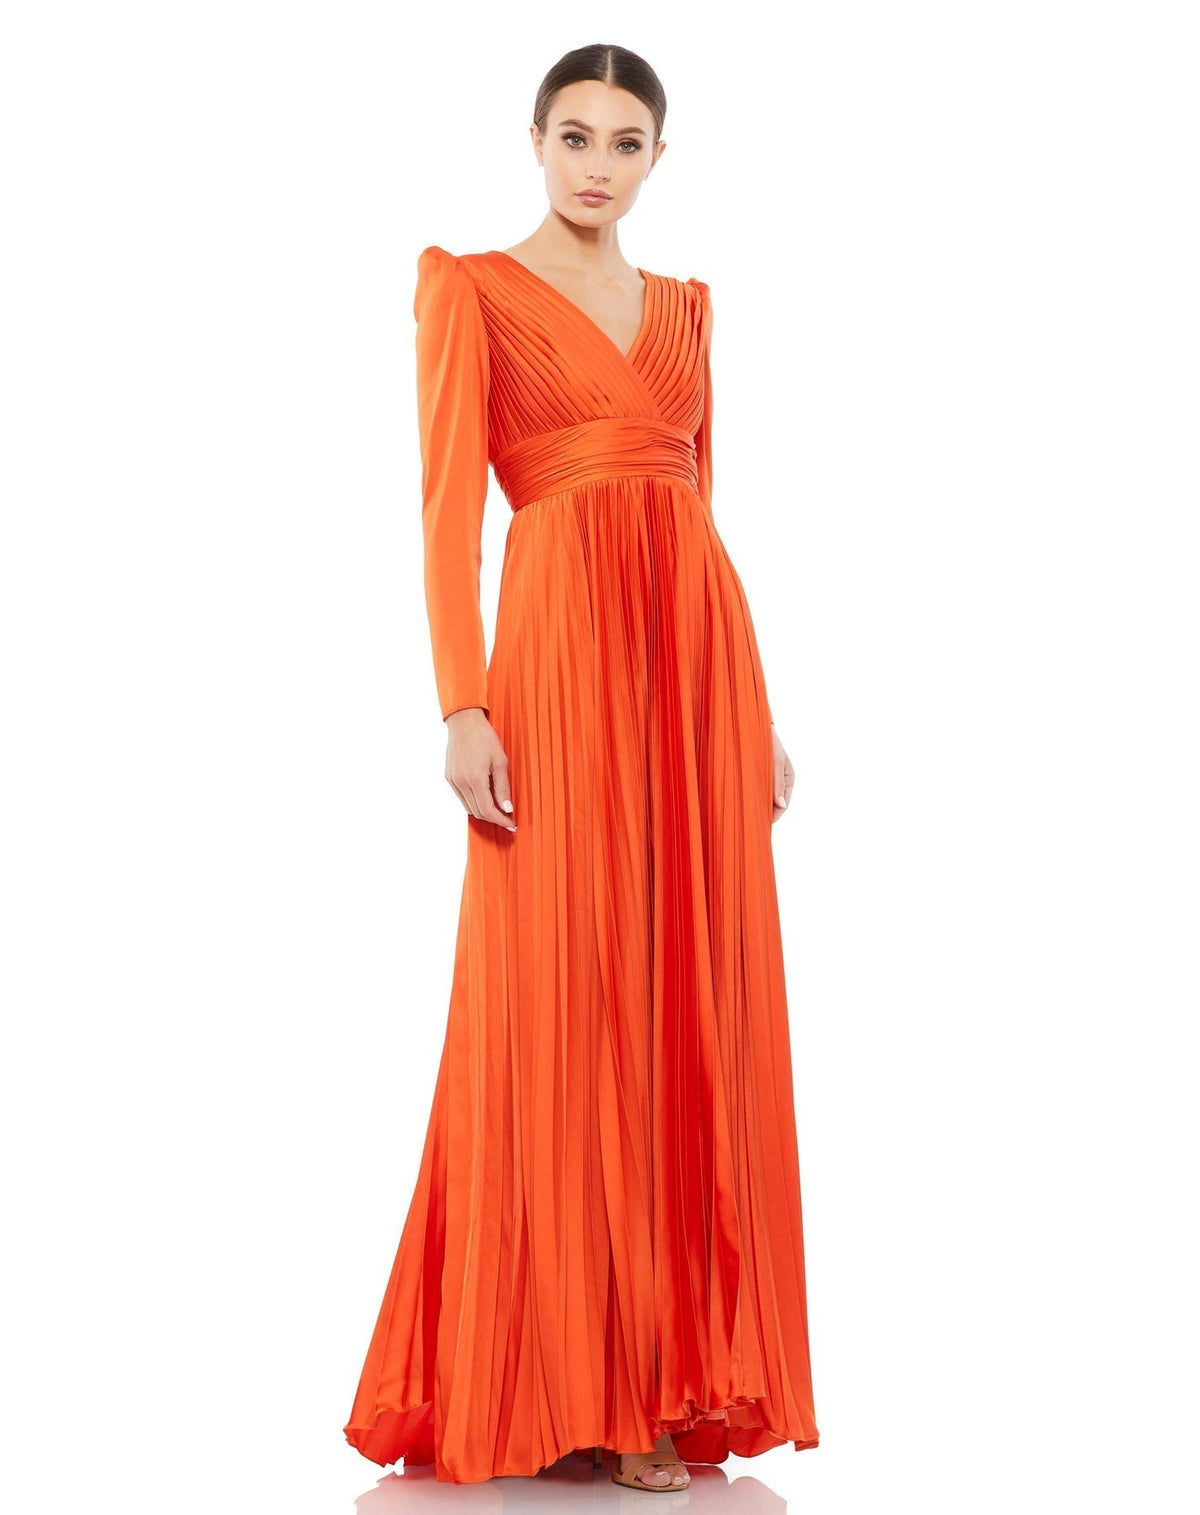 Mac Duggal, PLEATED LONG SLEEVE V-NECK GOWN modest gown, Style #26542 sunset orange